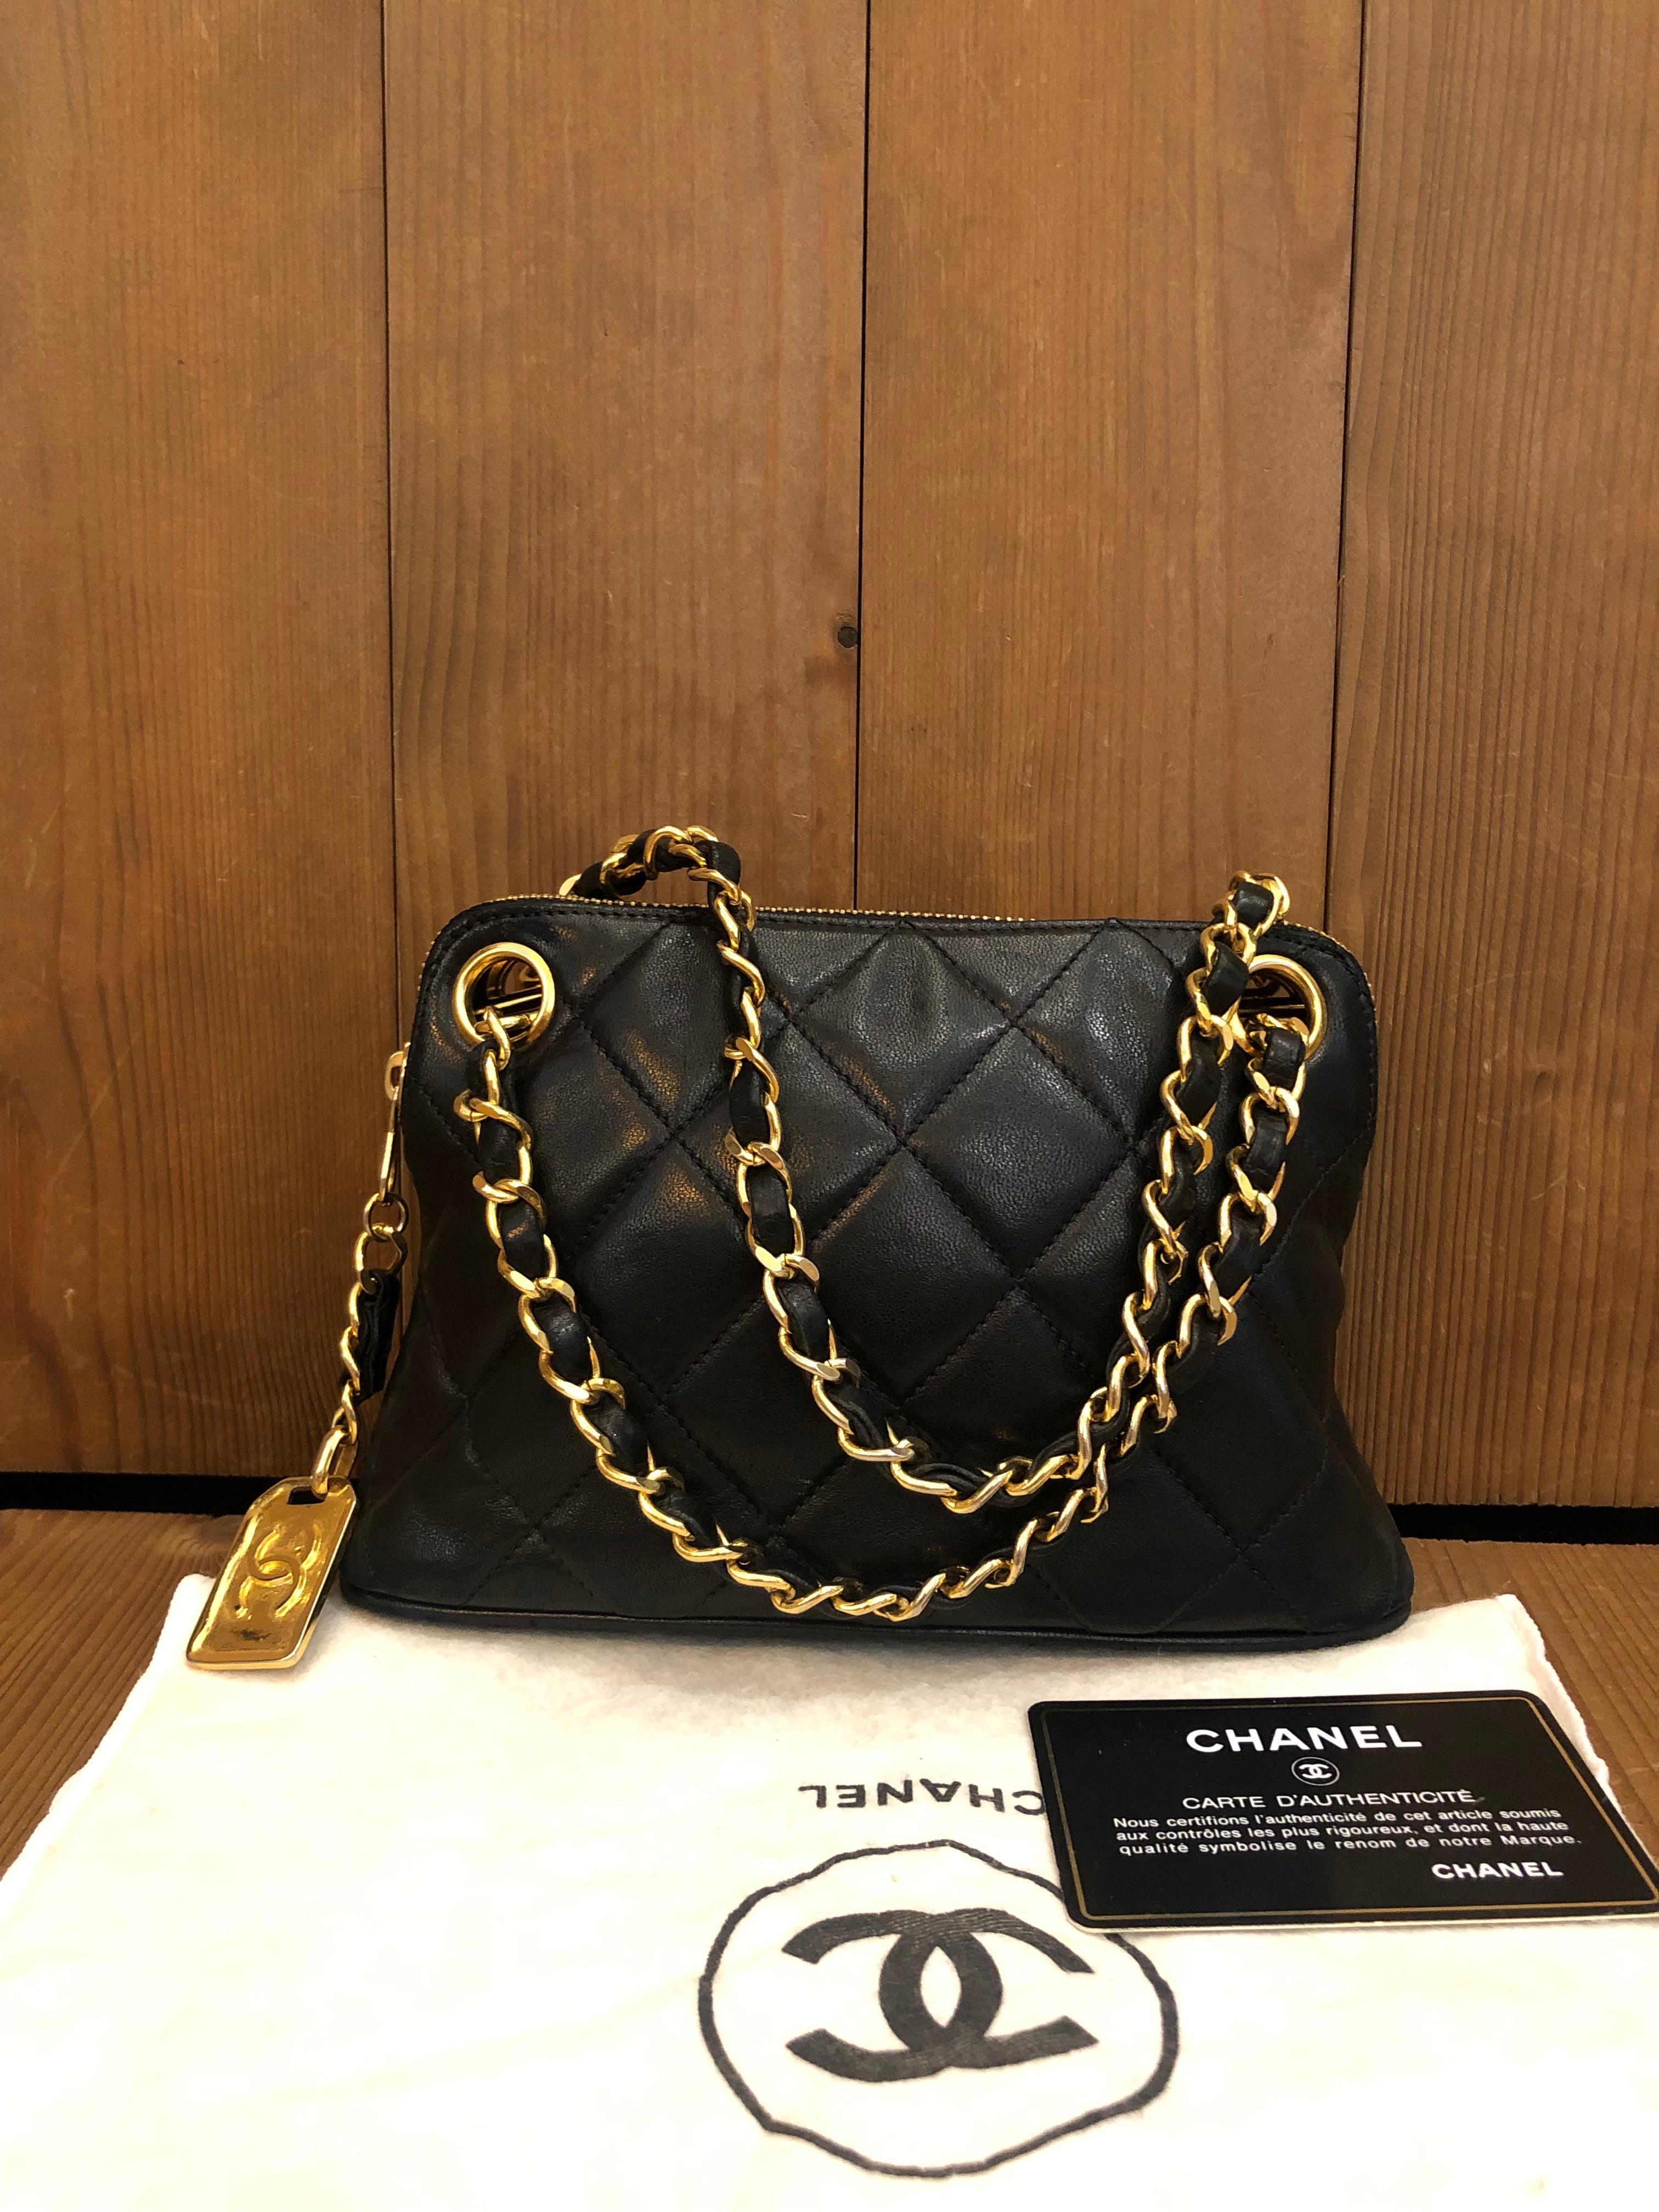 This vintage Chanel mini hand bag is crafted of Chanel’s iconic diamond quilted lambskin leather in black featuring gold toned chain handles interlaced with the same leather. 1xxxxxx series. Made in Italy. Measures approximately  7.75 x 5 x 2.25